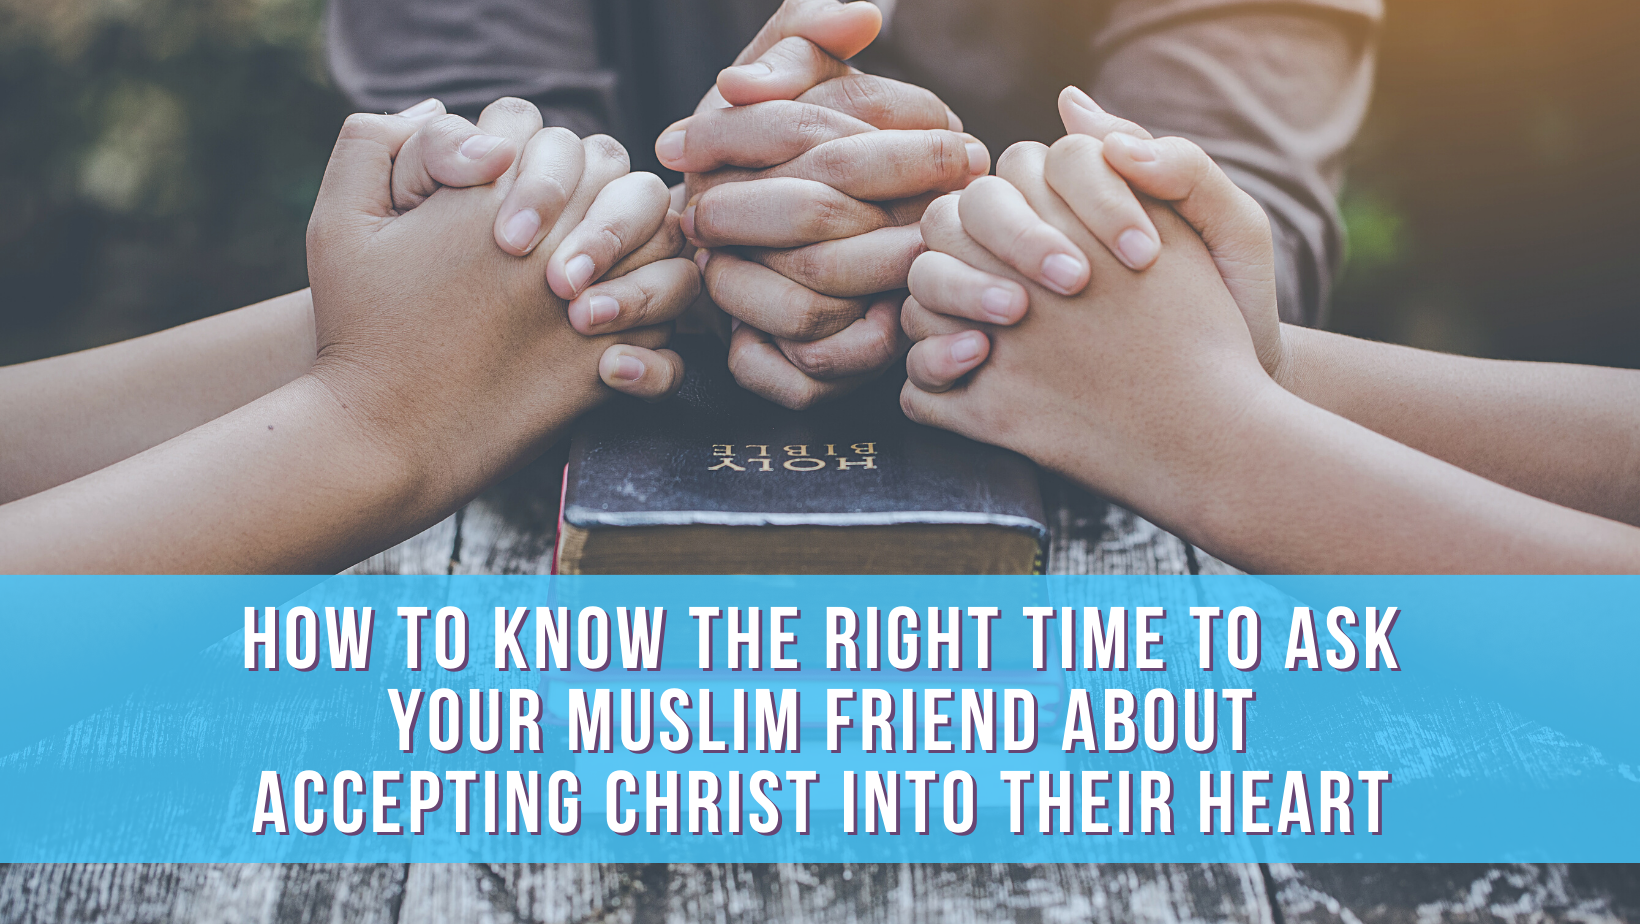 How to know the right time to ask your Muslim friend about accepting Christ into their heart